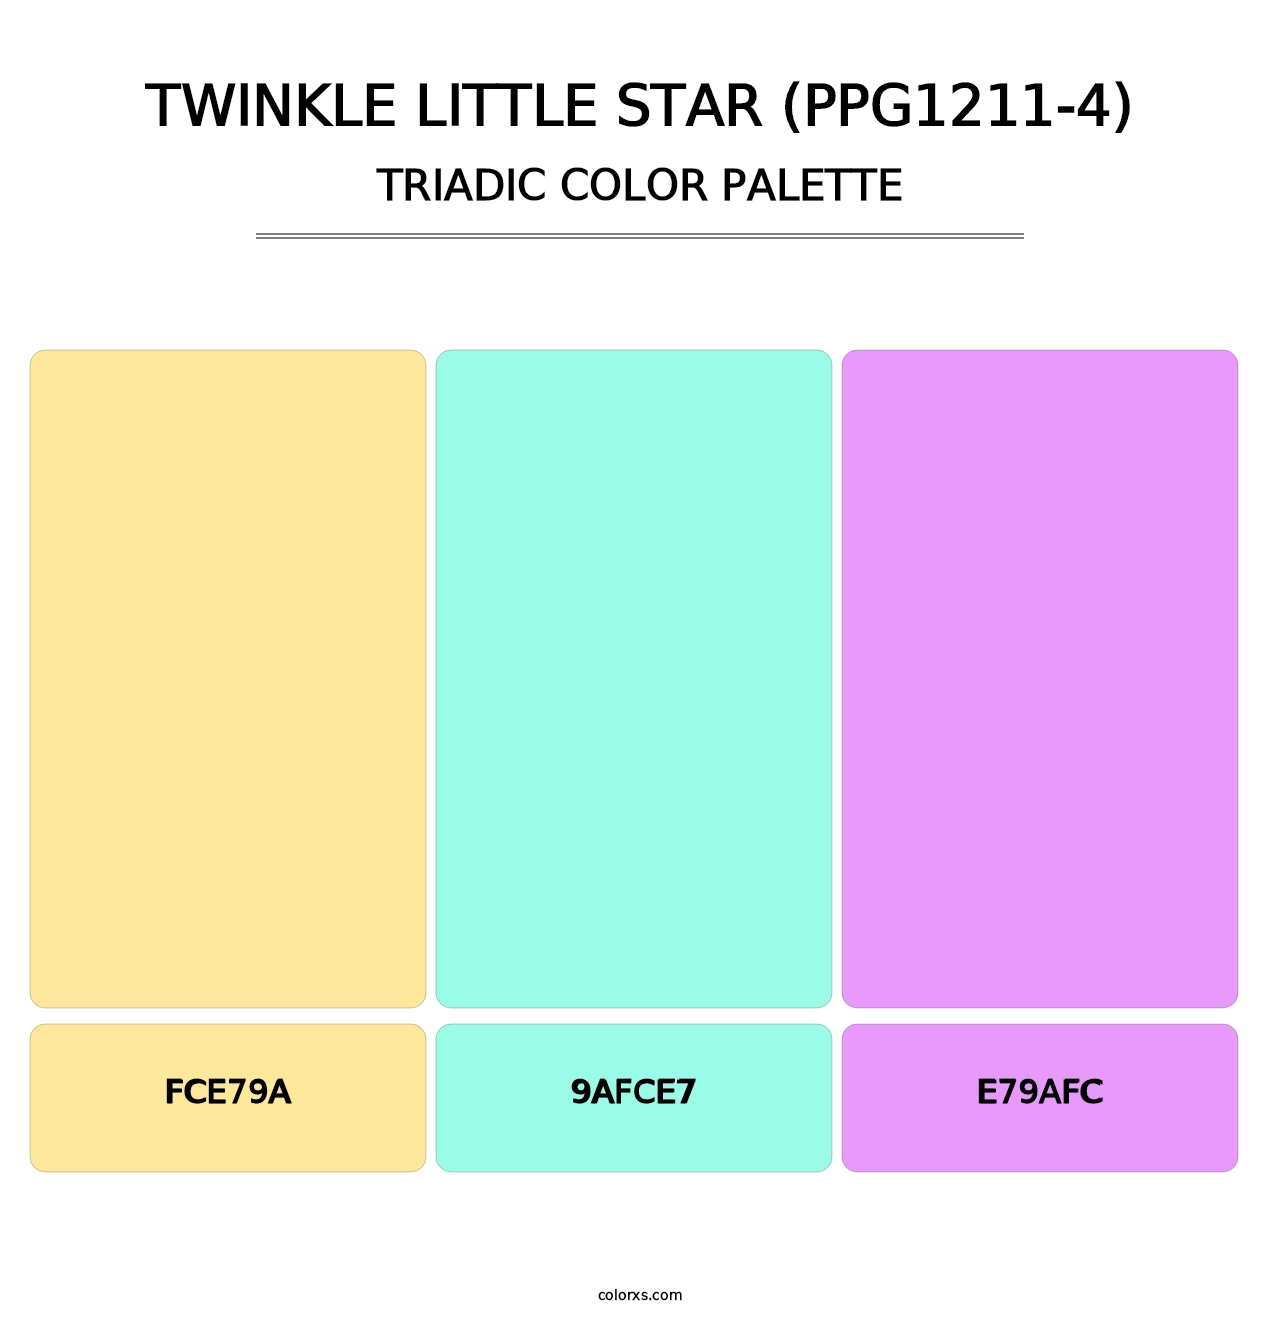 Twinkle Little Star (PPG1211-4) - Triadic Color Palette